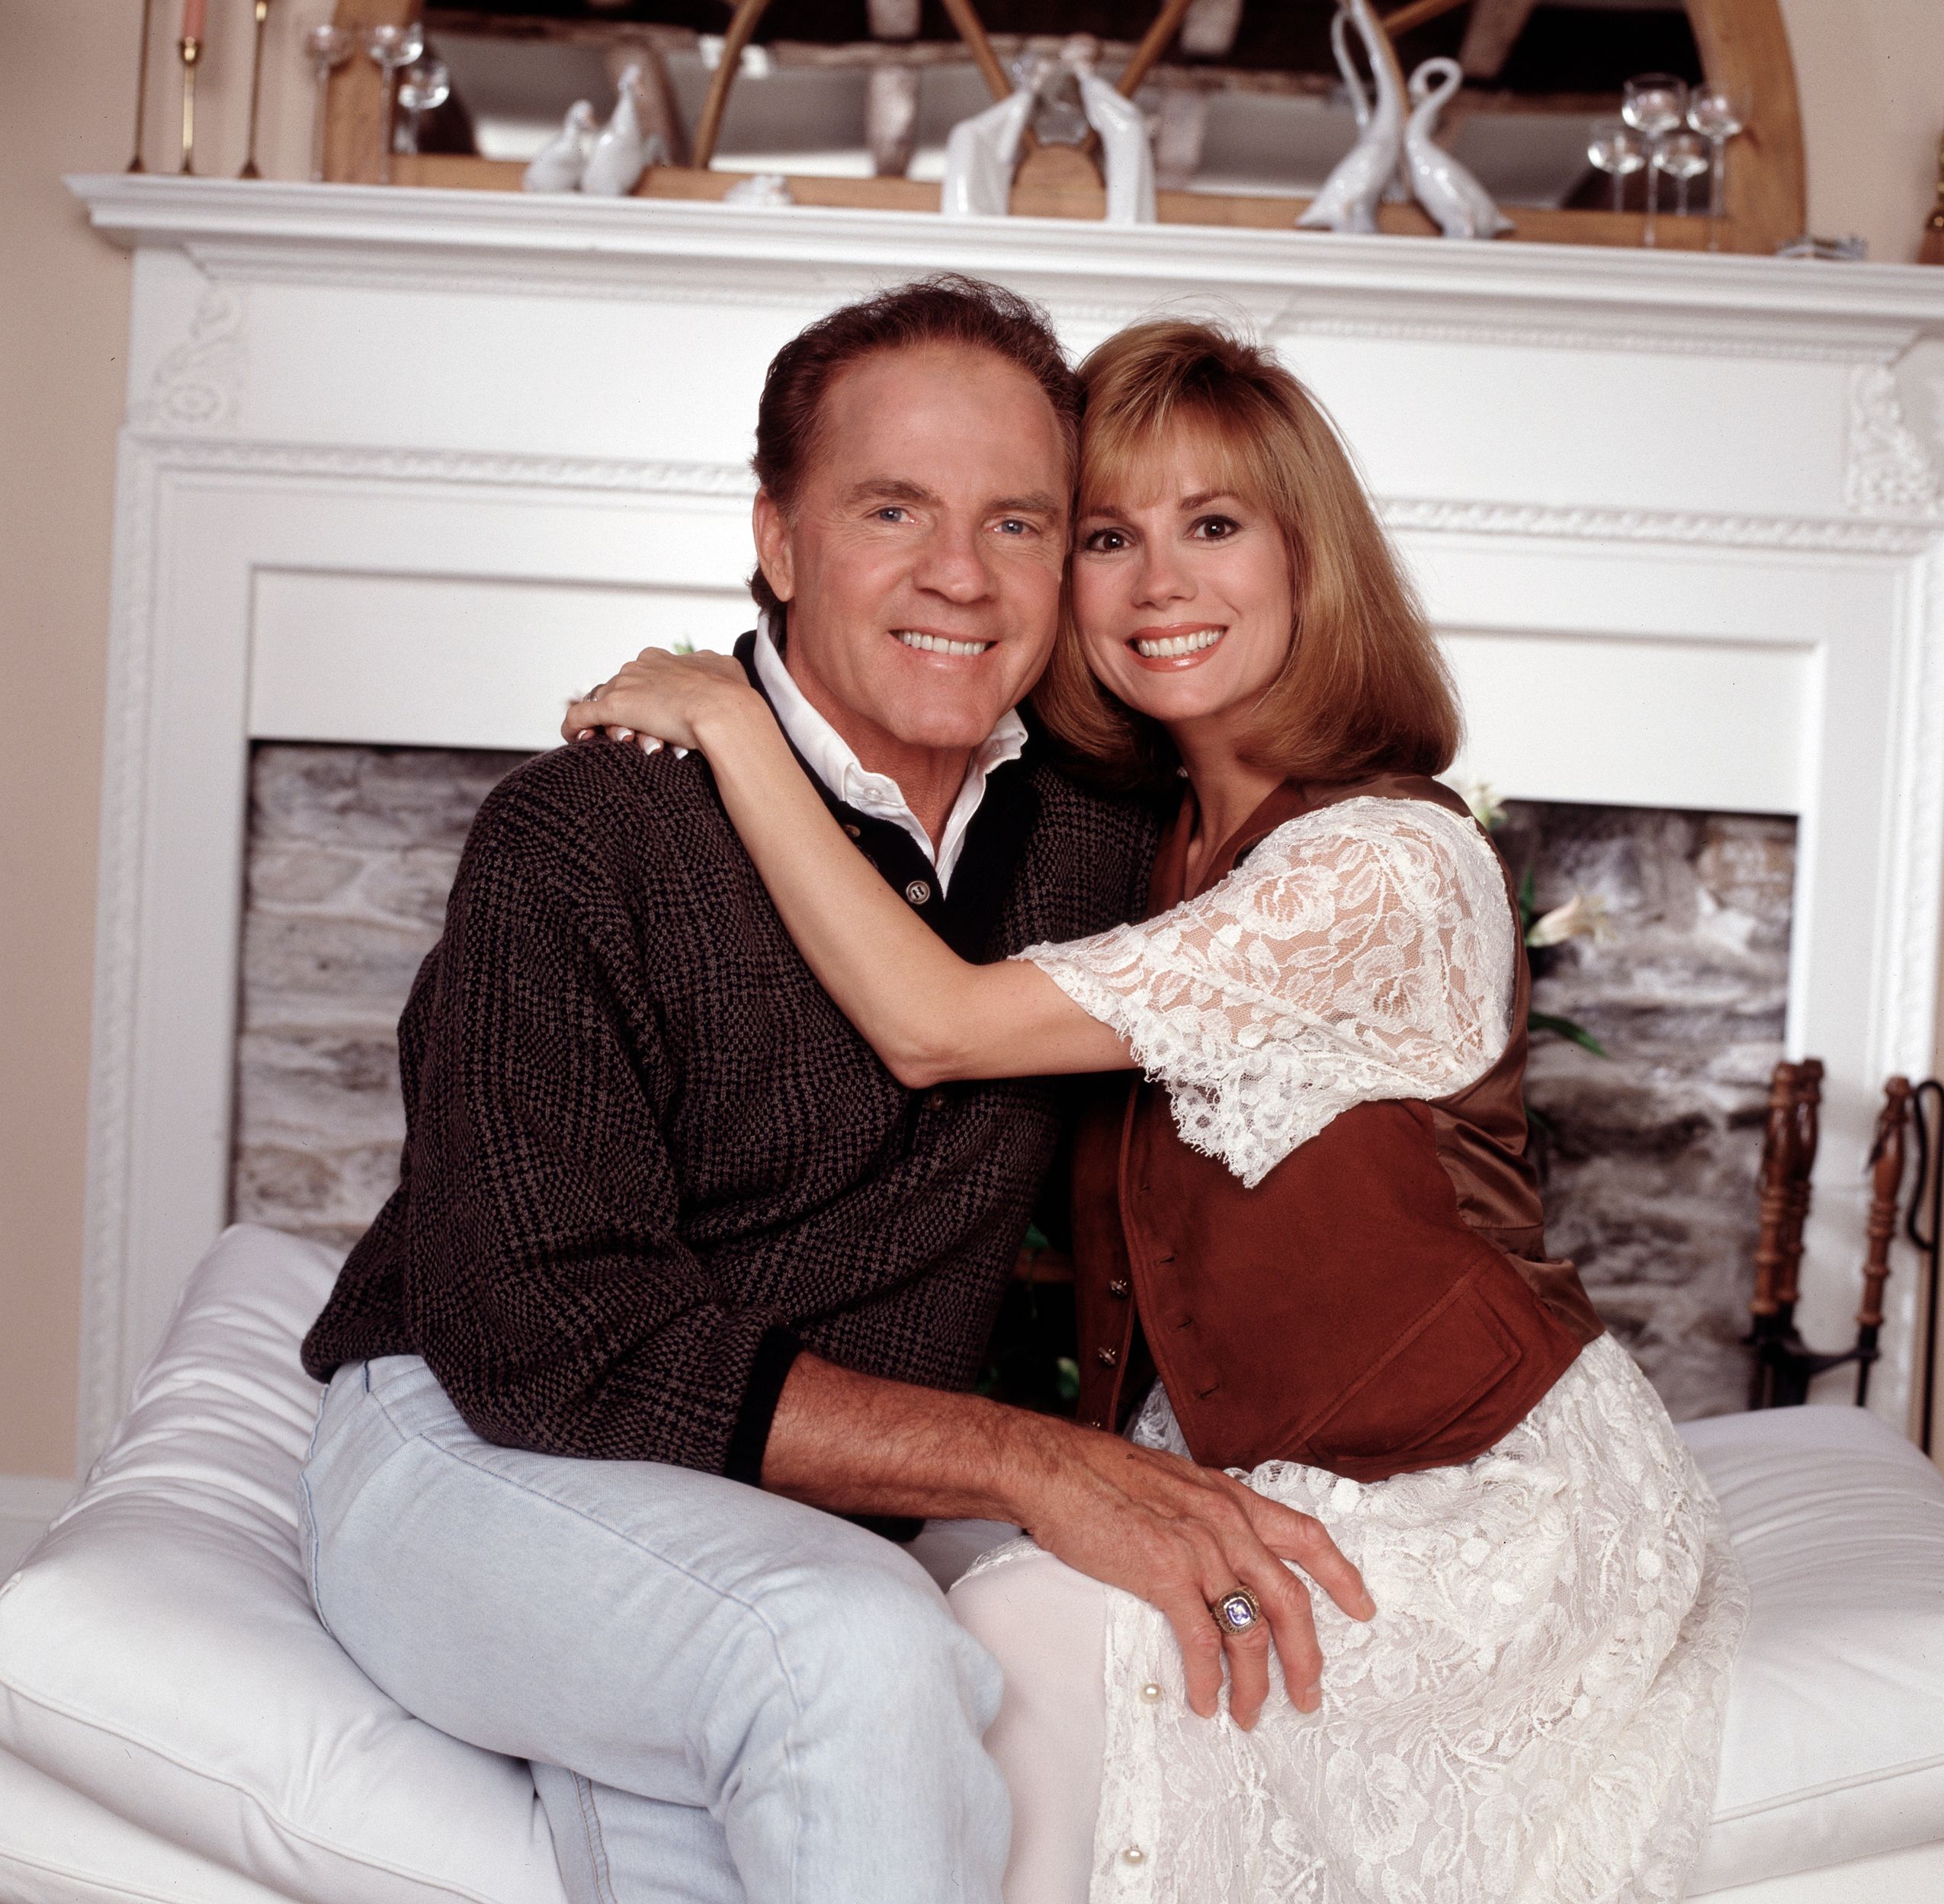 Frank and Kathie Lee Gifford for an Walt Disney Television interview with Barbara Walters, October 5, 1992. | Source: Getty Images